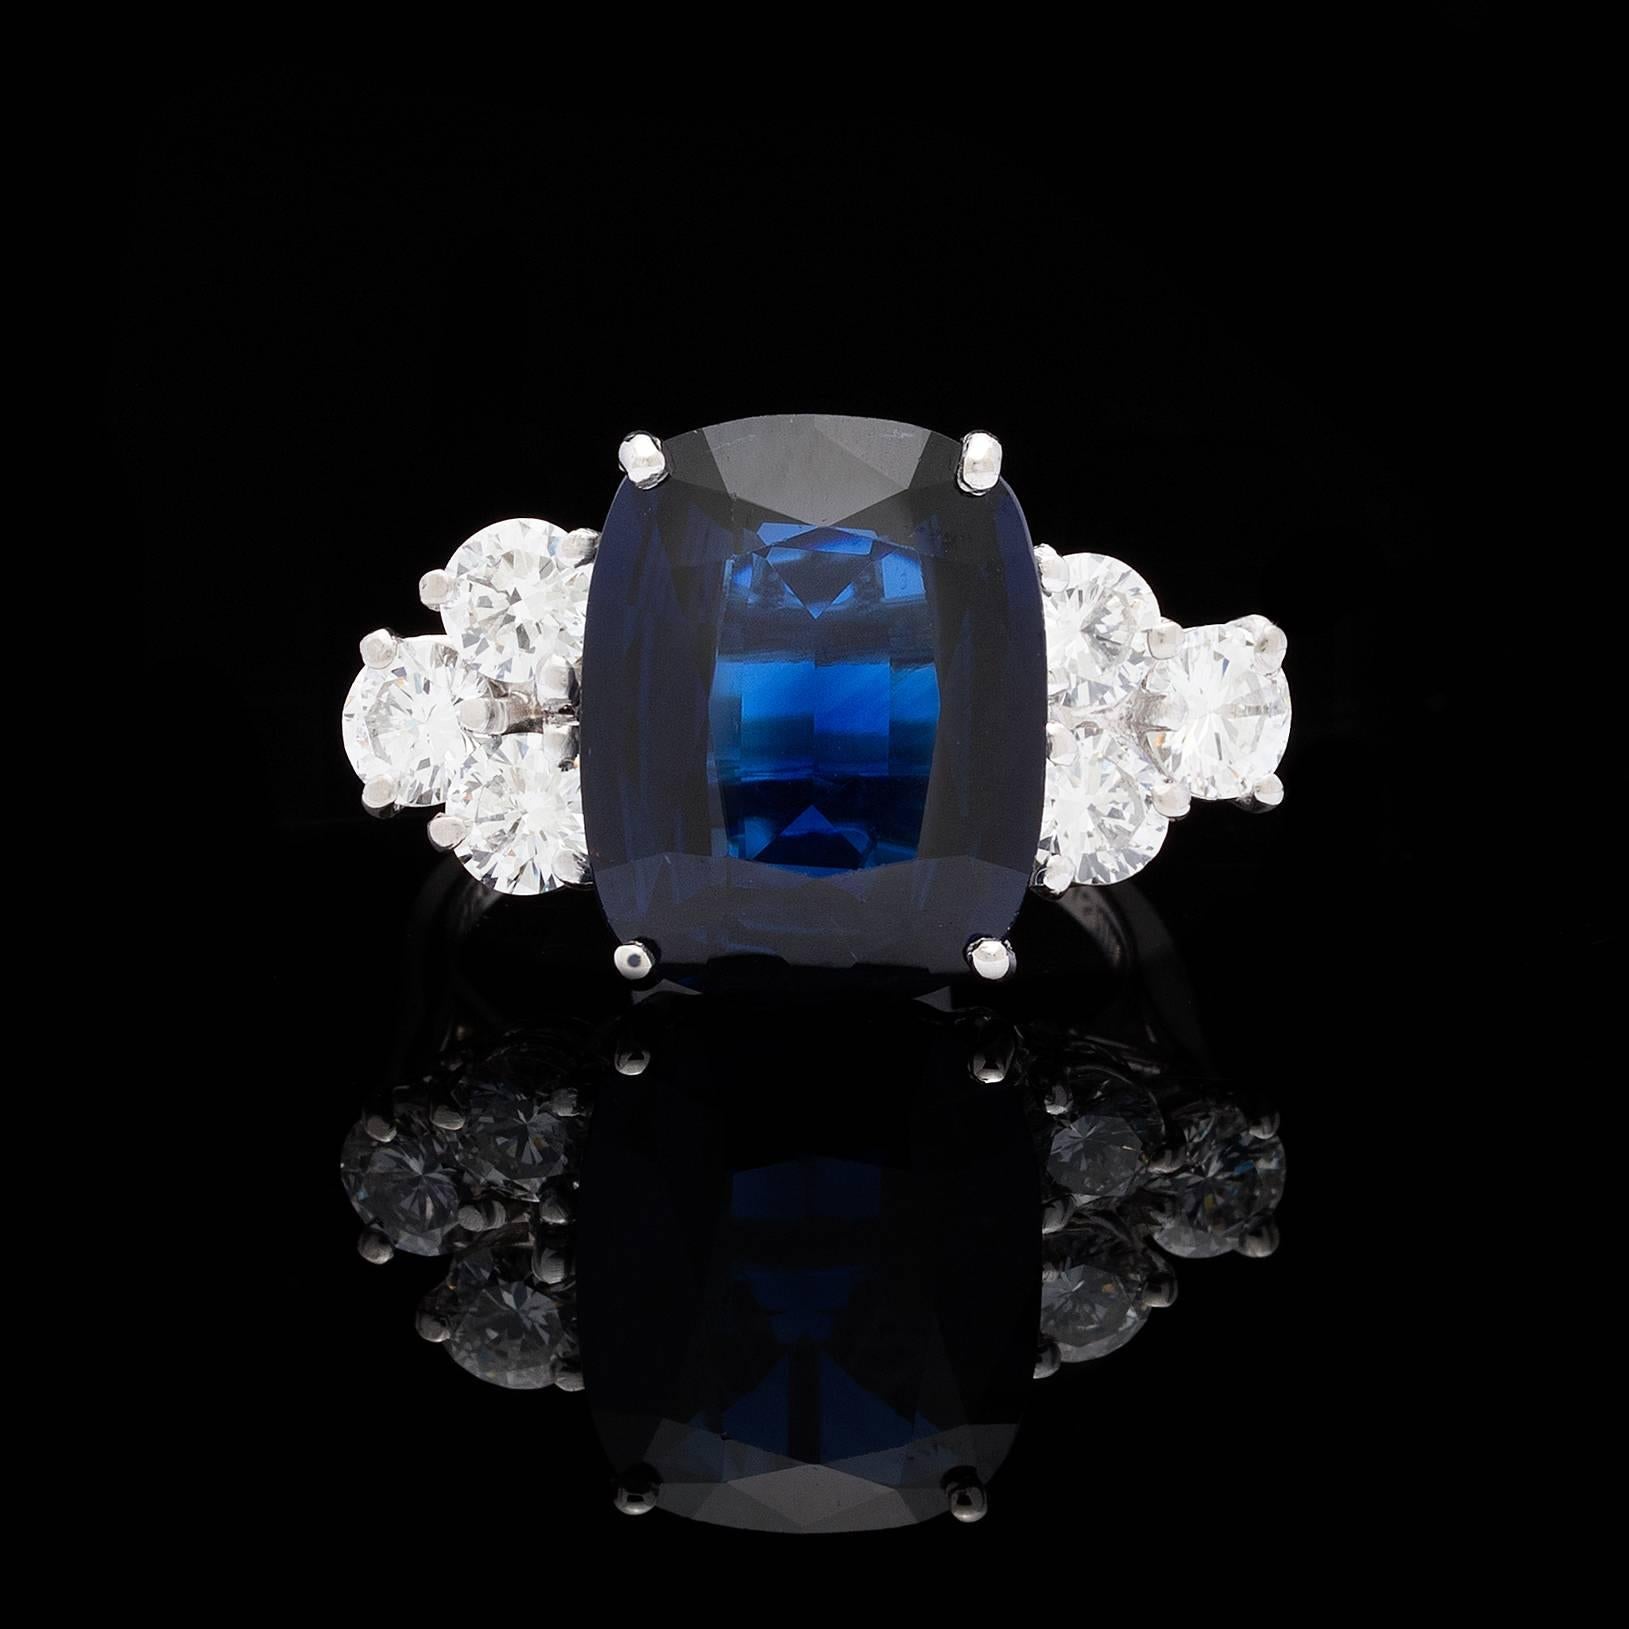 Fabulous cocktail platinum ring features a GIA 8.35 carat cushion shape mixed cut blue sapphire accented with 6 round brilliant diamonds totaling 1.32 carats. Ring size is a 4.5 and can be resized. Total weight of the ring is 8.3 grams. This ring